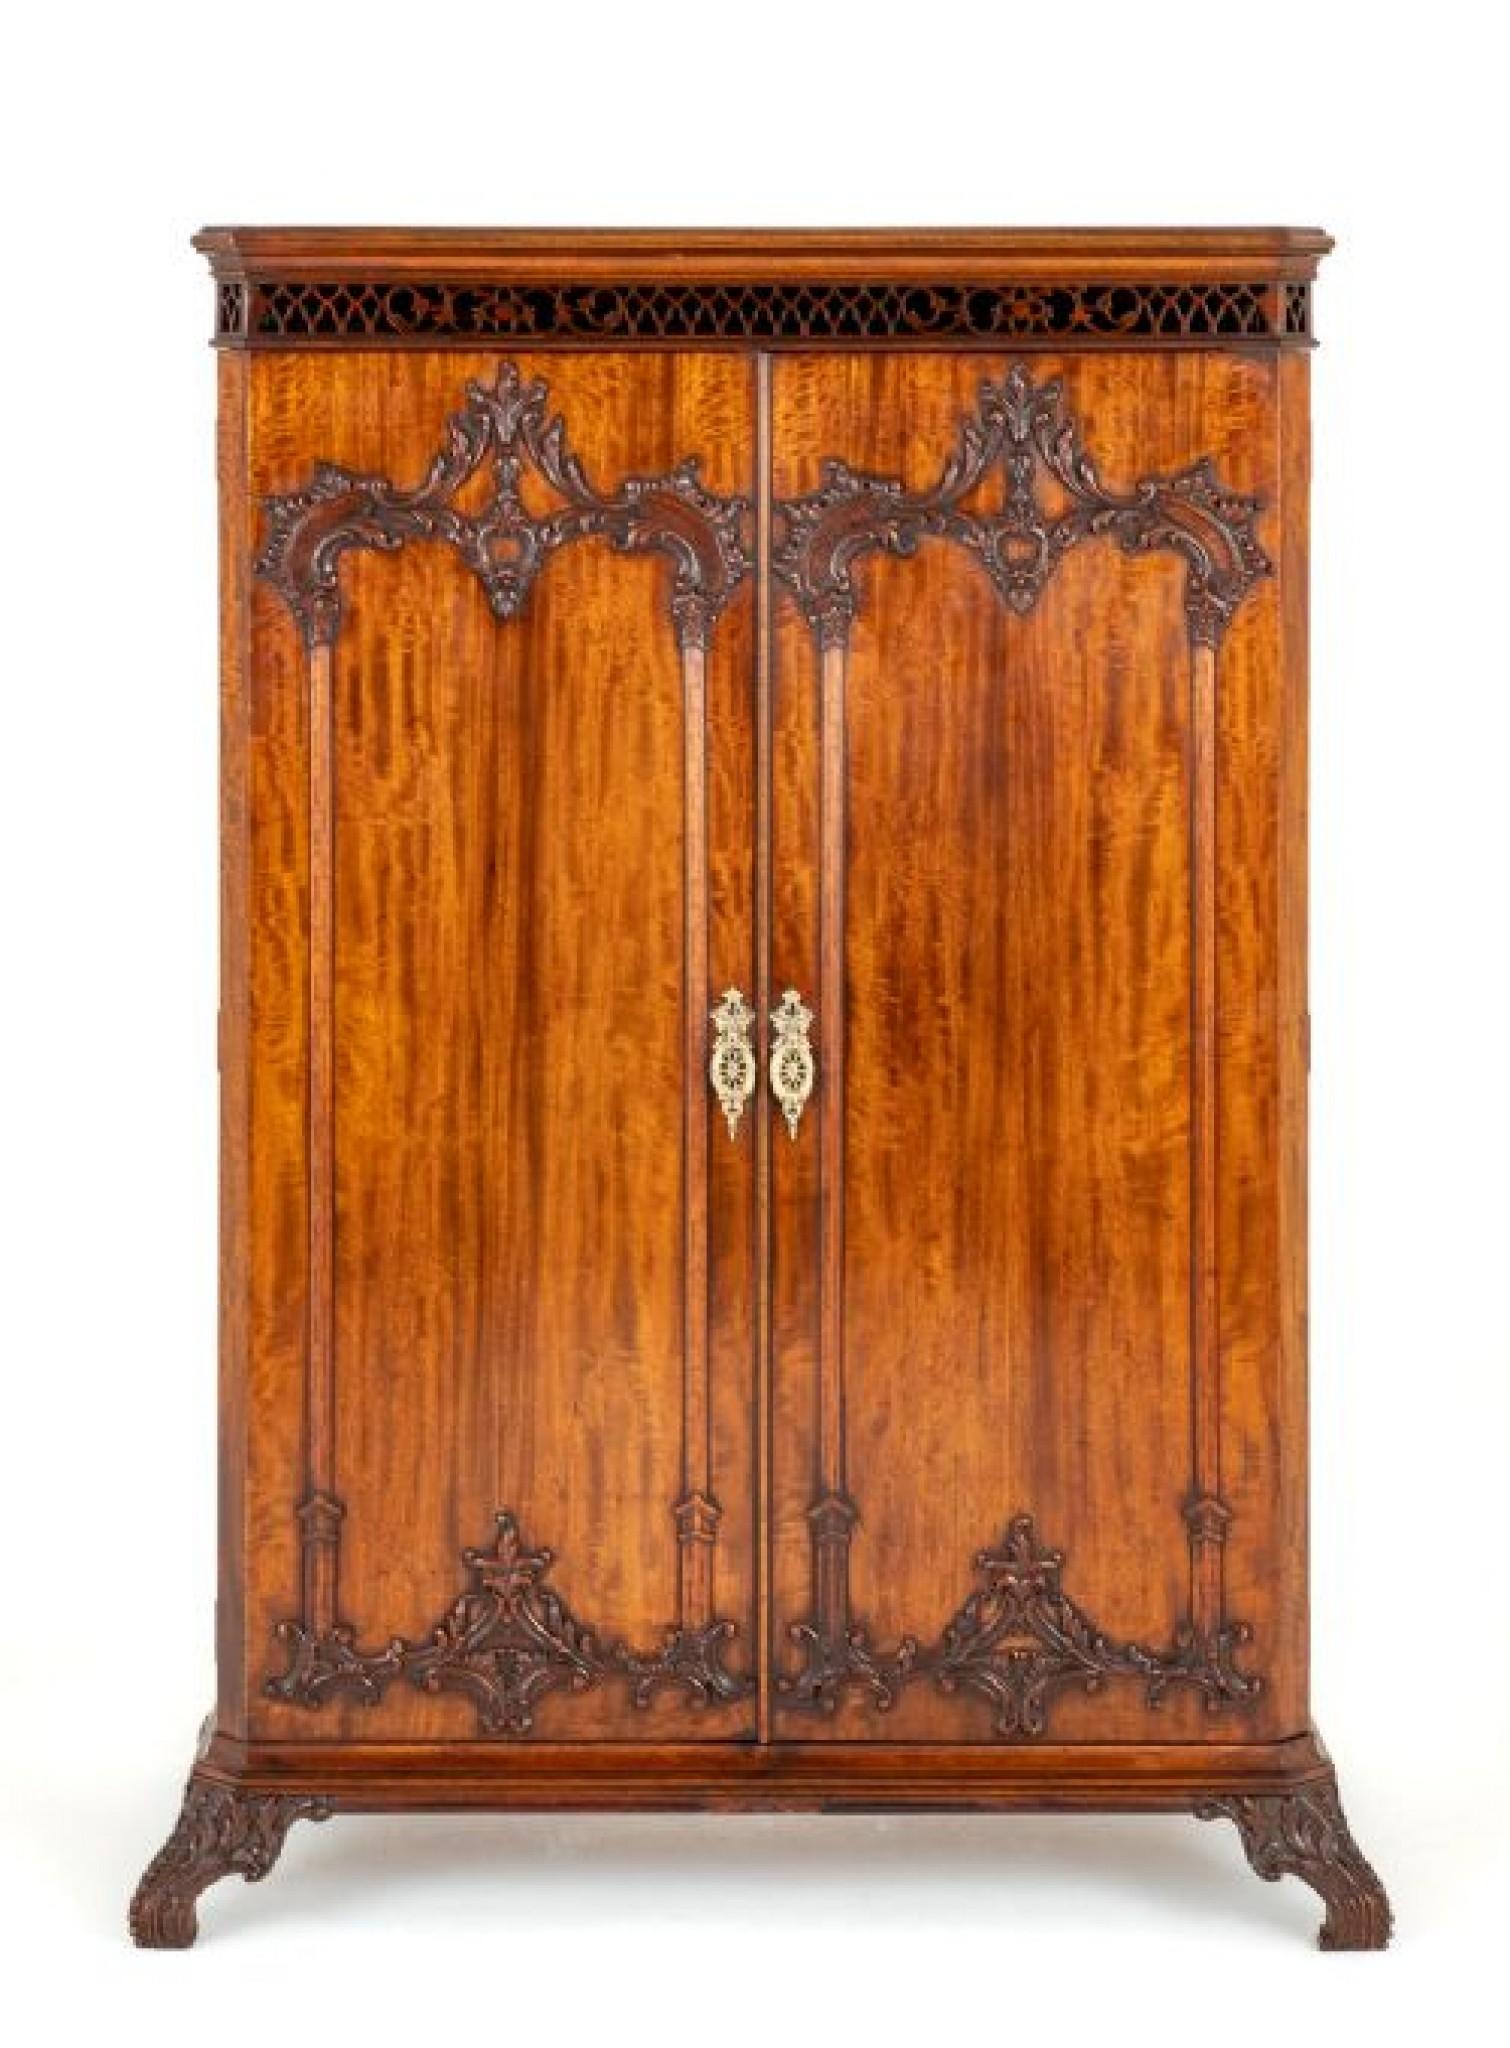 Wonderful Quality 2 Door Mahogany Wardrobe.
Circa 1860
This Wardrobe Stands Upon Carved and Shaped Feet.
Featuring 2 Doors with Amazing Timbers and Wonderful Carved Moldings.
The Cornice Having Open Fret Work.
Inside the Wardrobe there is a Hanging